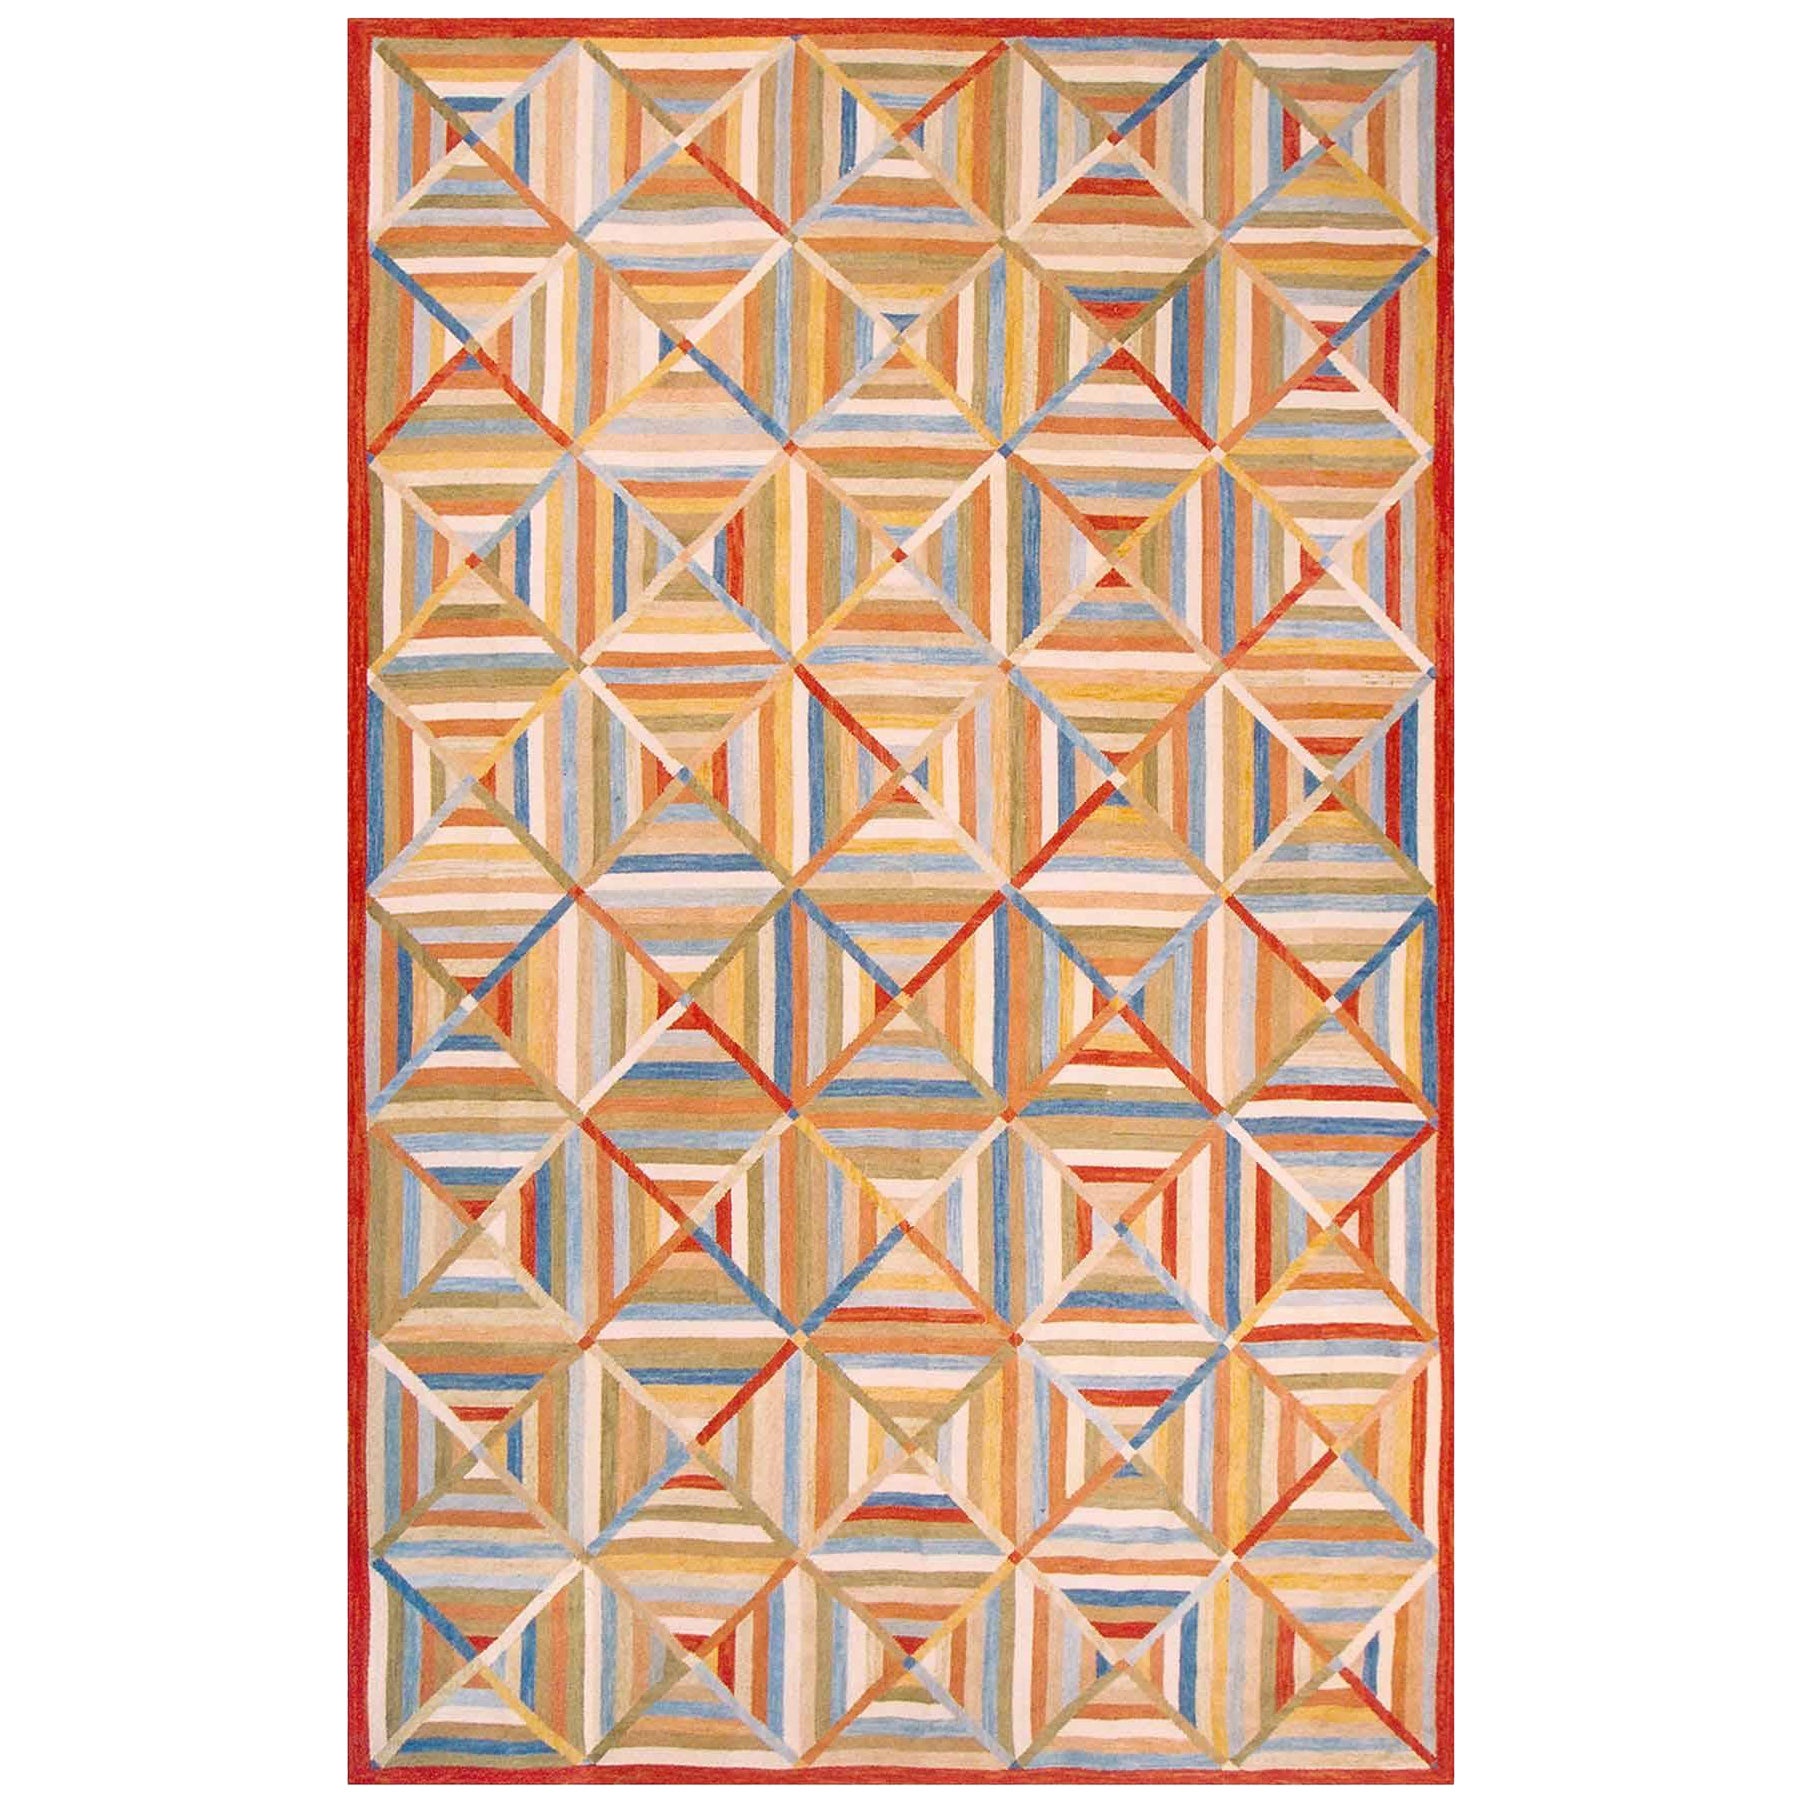 Contemporary American Hooked Rug 10' 0" x 14' 0" (305 x 427 cm) For Sale